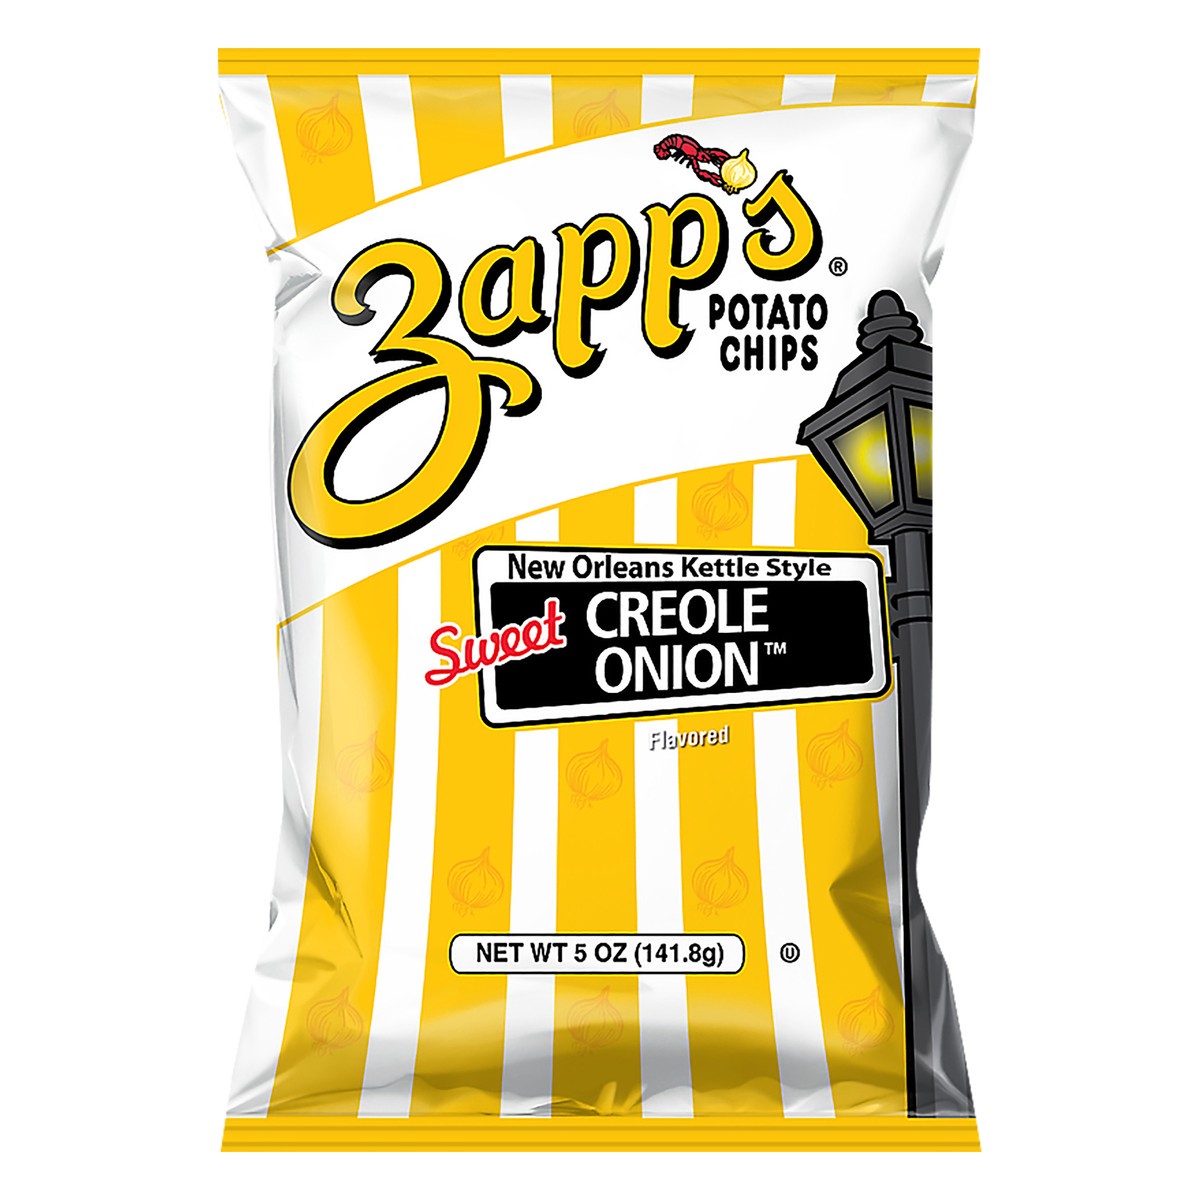 slide 9 of 11, Zapp's New Orleans Kettle Style Sweet Creole Onion Flavored Potato Chips 5 oz, 5 oz